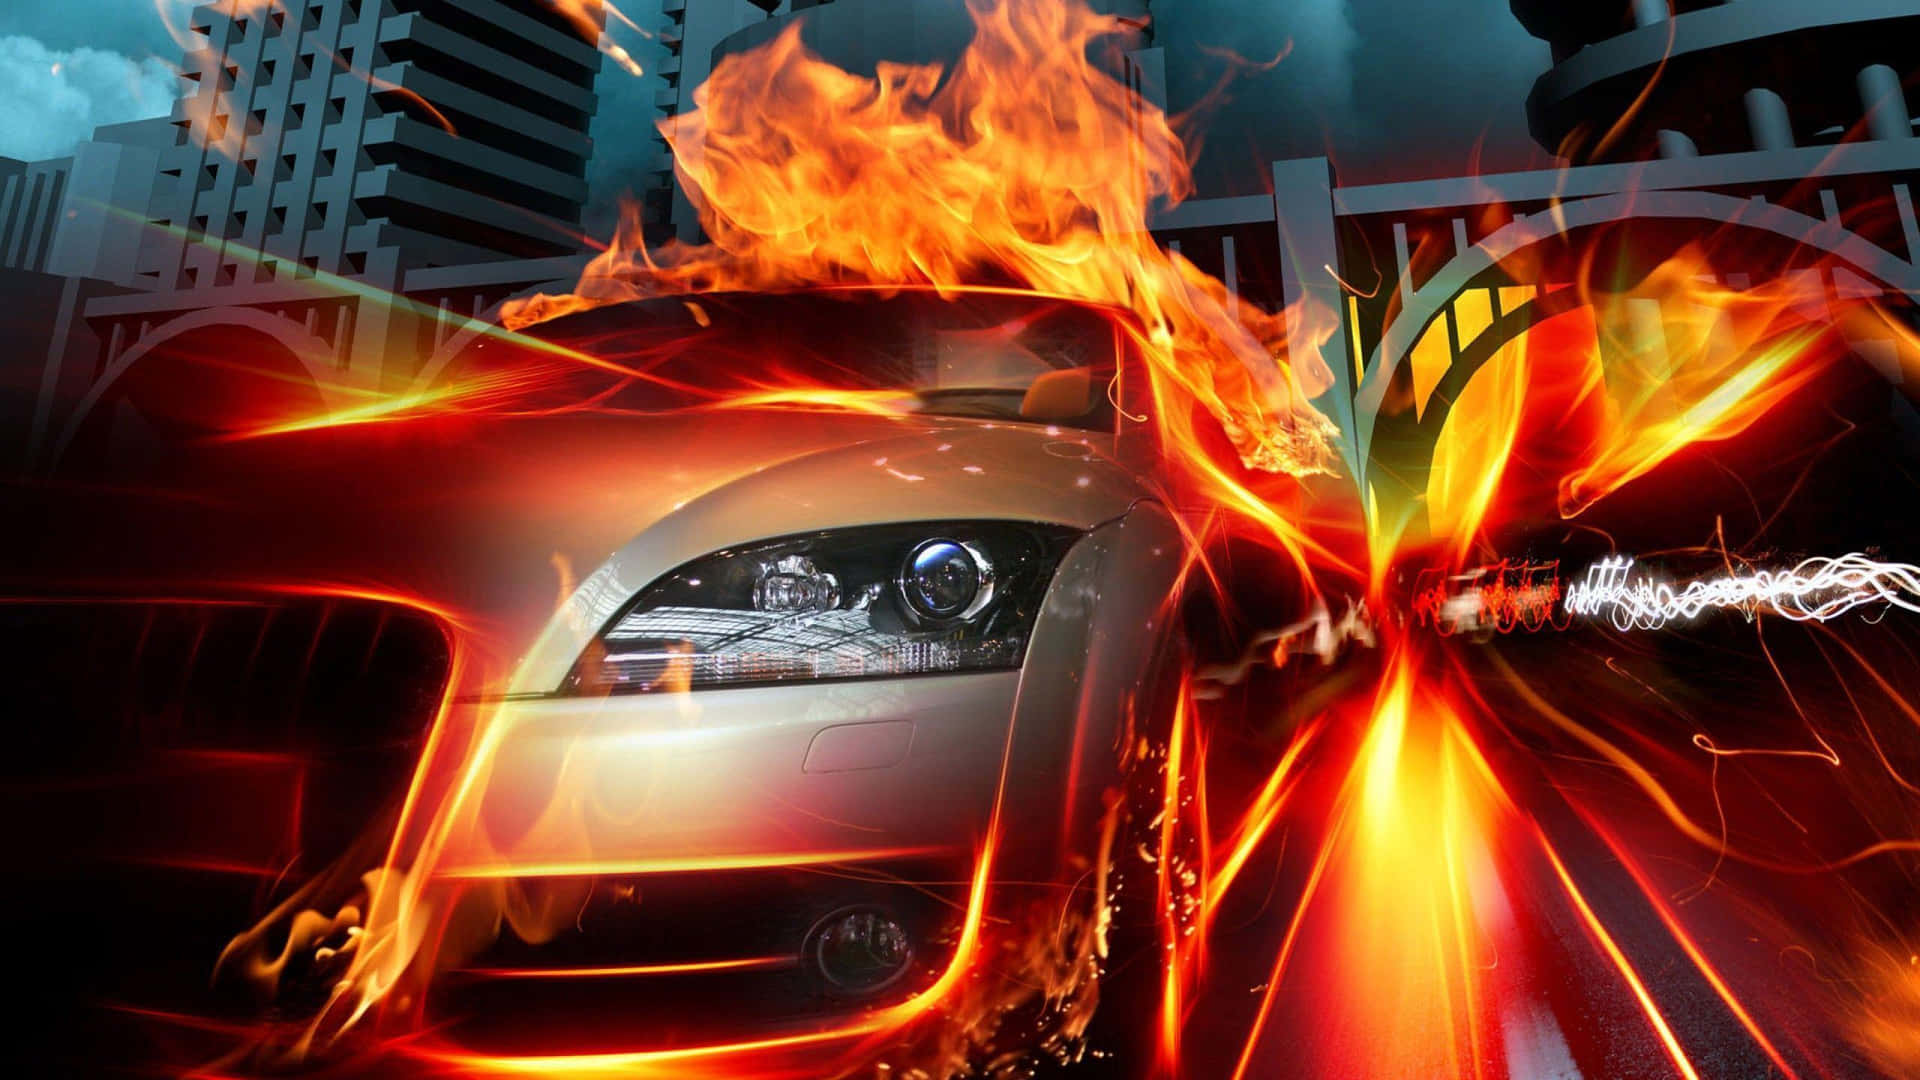 Super Cool Car On Fire Background